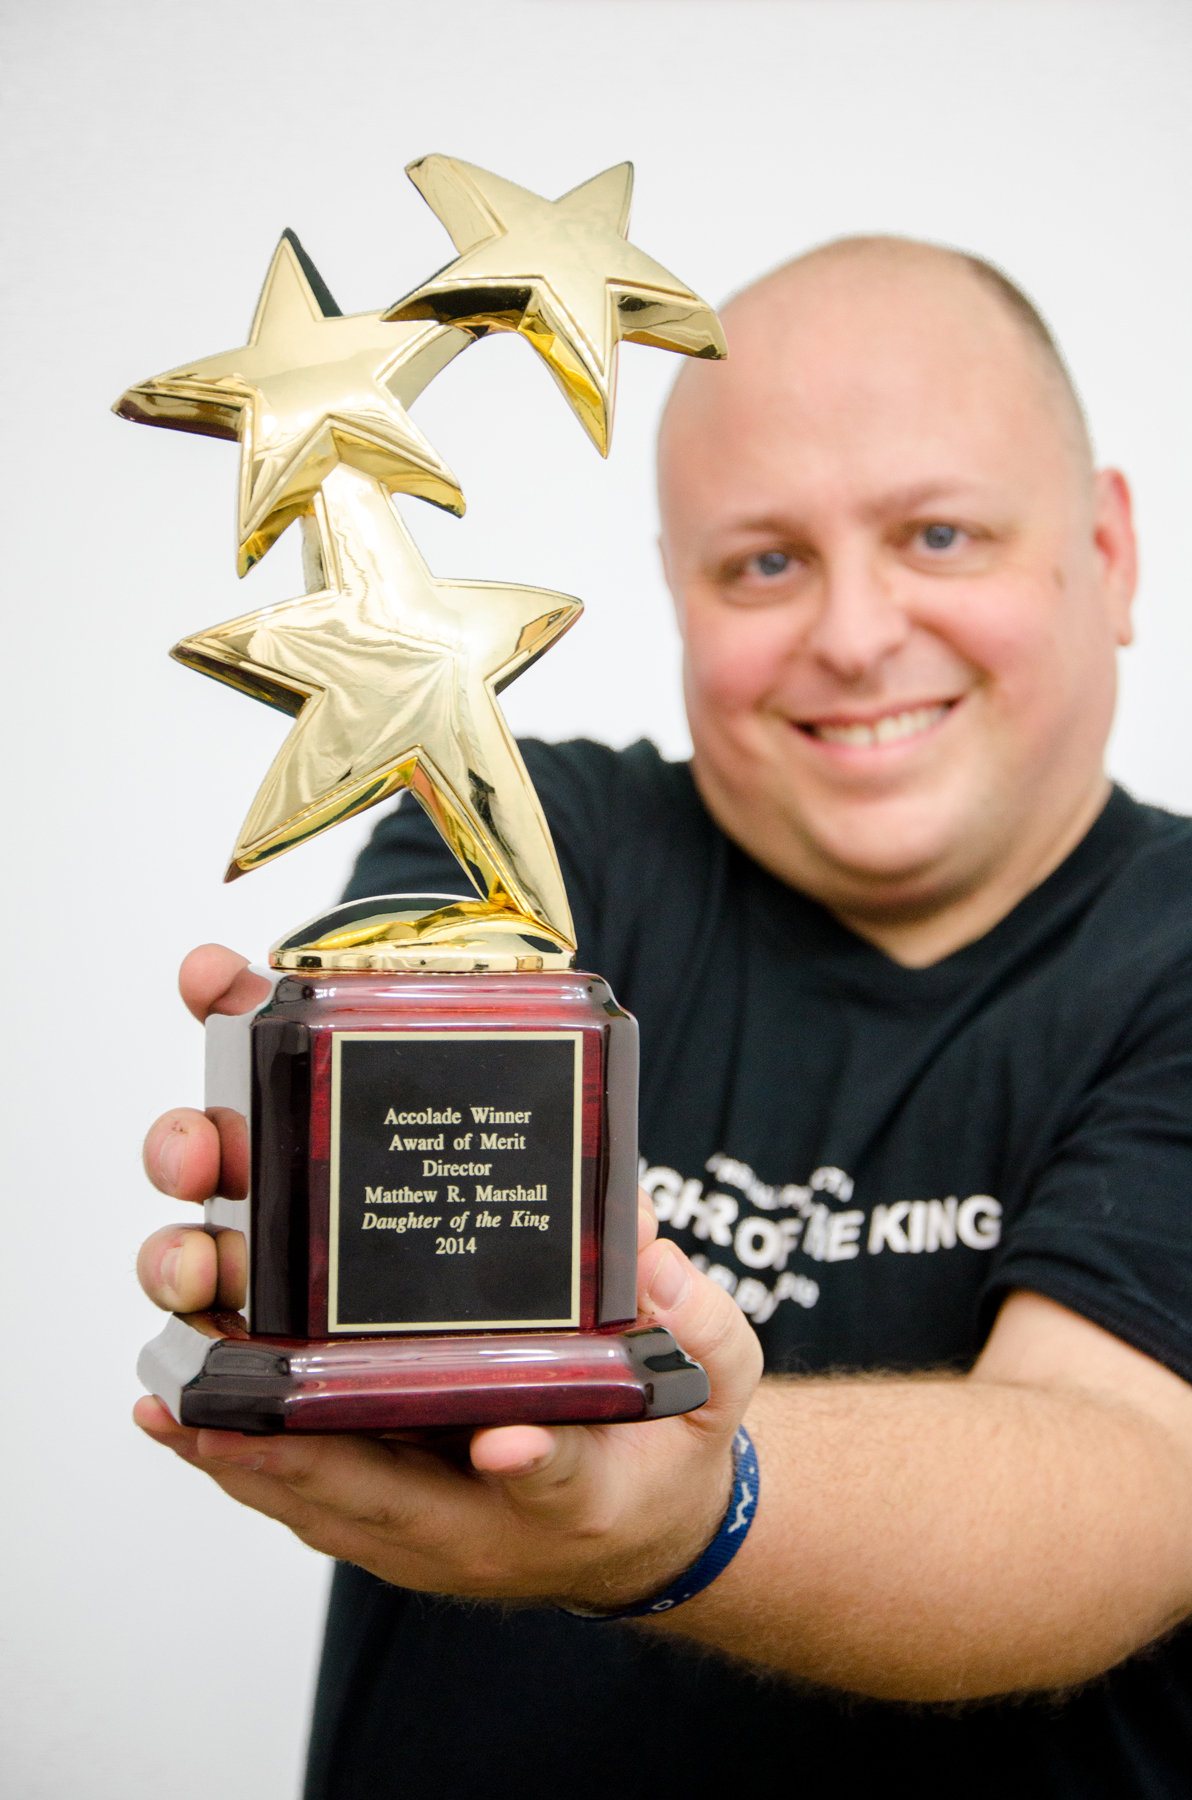 Matthew Marshall with his 2014 Accolade Global Film Competition Award of Merit: Director for Daughter of the King. The independent dramatic production won two other 2014 Accolade Global Film Competition Awards. The production won an Award of Merit: Christian Film and Debra van Gaalen won Award of Merit: Leading Actress for her role as Ashley Miller.